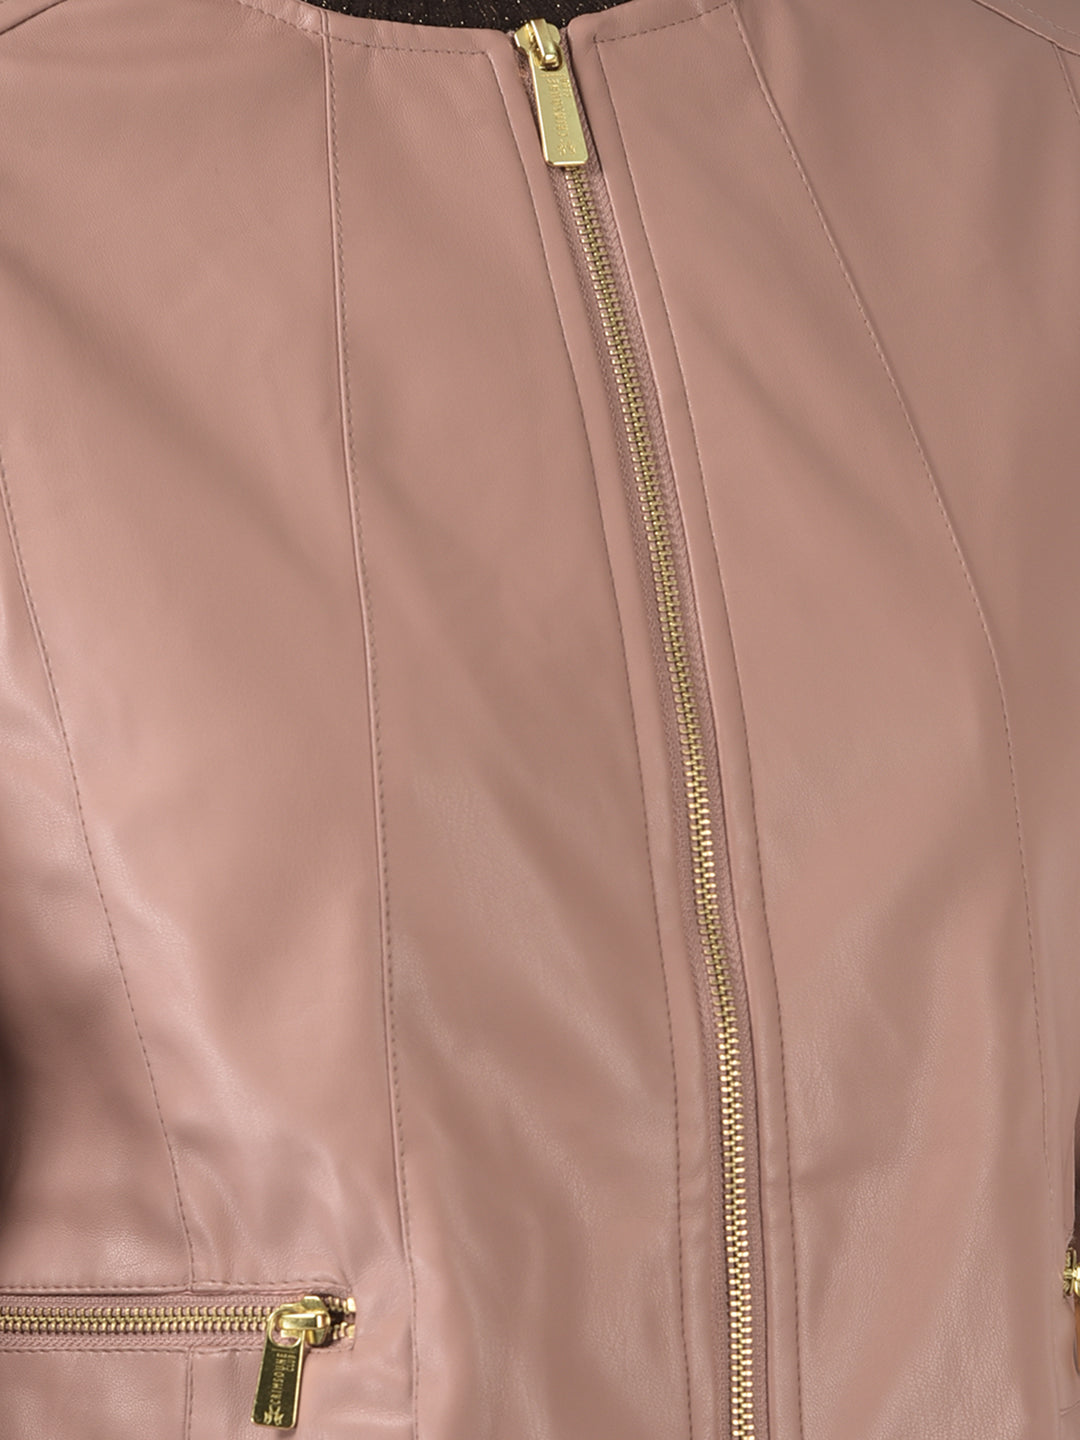  Nude Pink Faux Leather Jacket